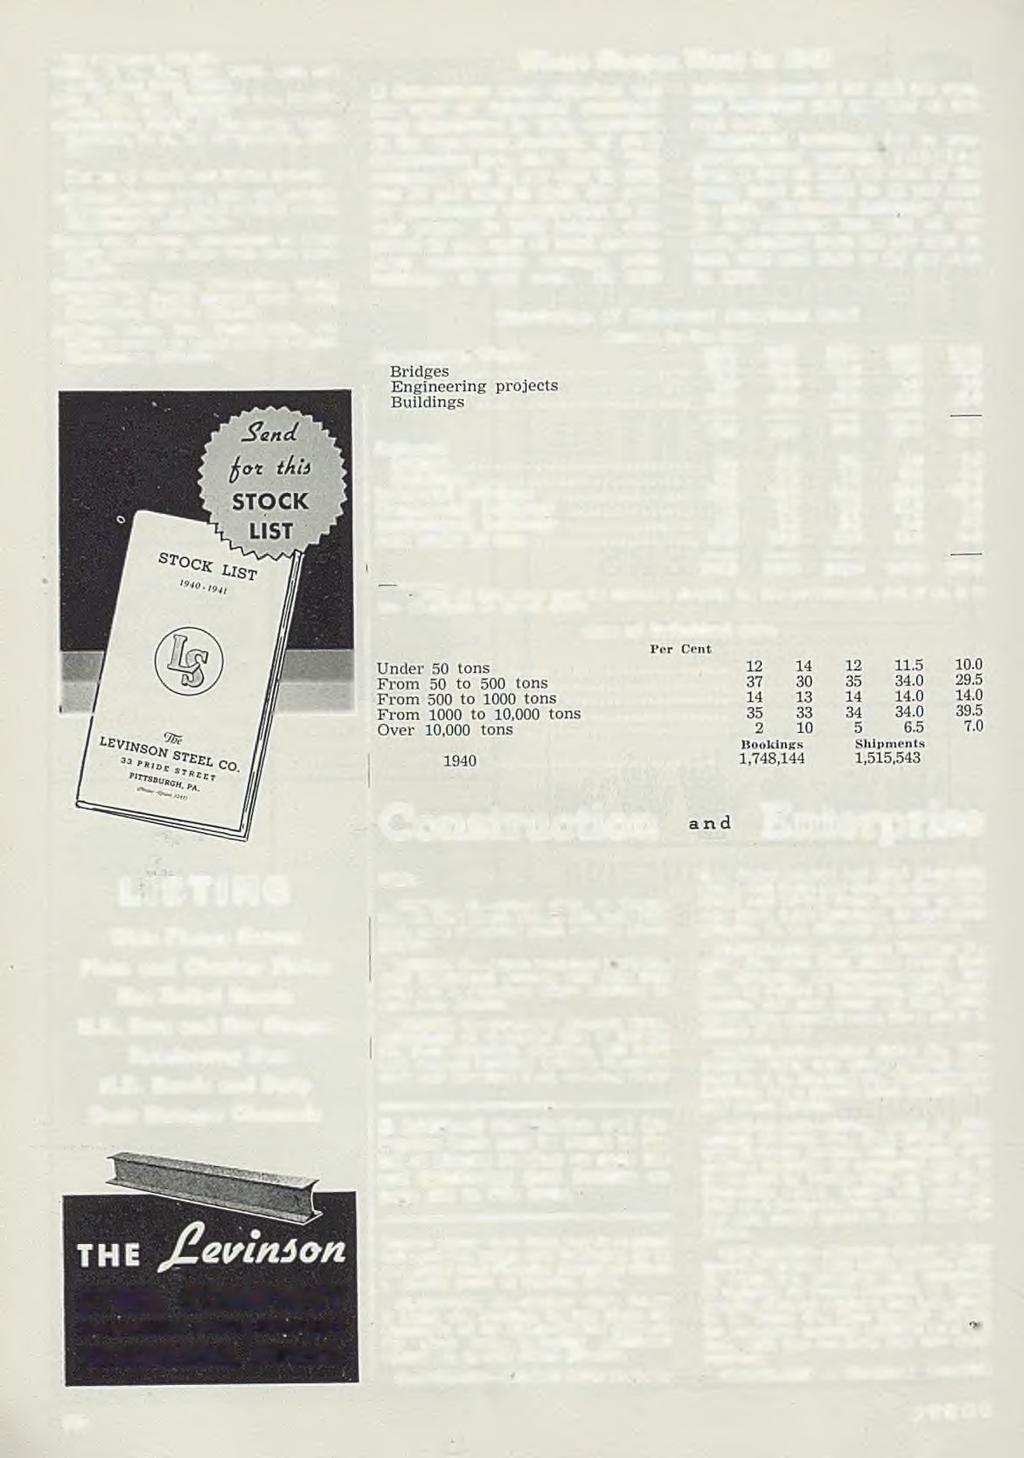 ing machines, $20,476. Willis, E. J., Co., New York, ship and motor boat bells, $5215. Wire Rope Mfg. Eąuipm ent Co., Seattle. wire, steel rope, $16,920. W orthington Pump & M achinery Corp.